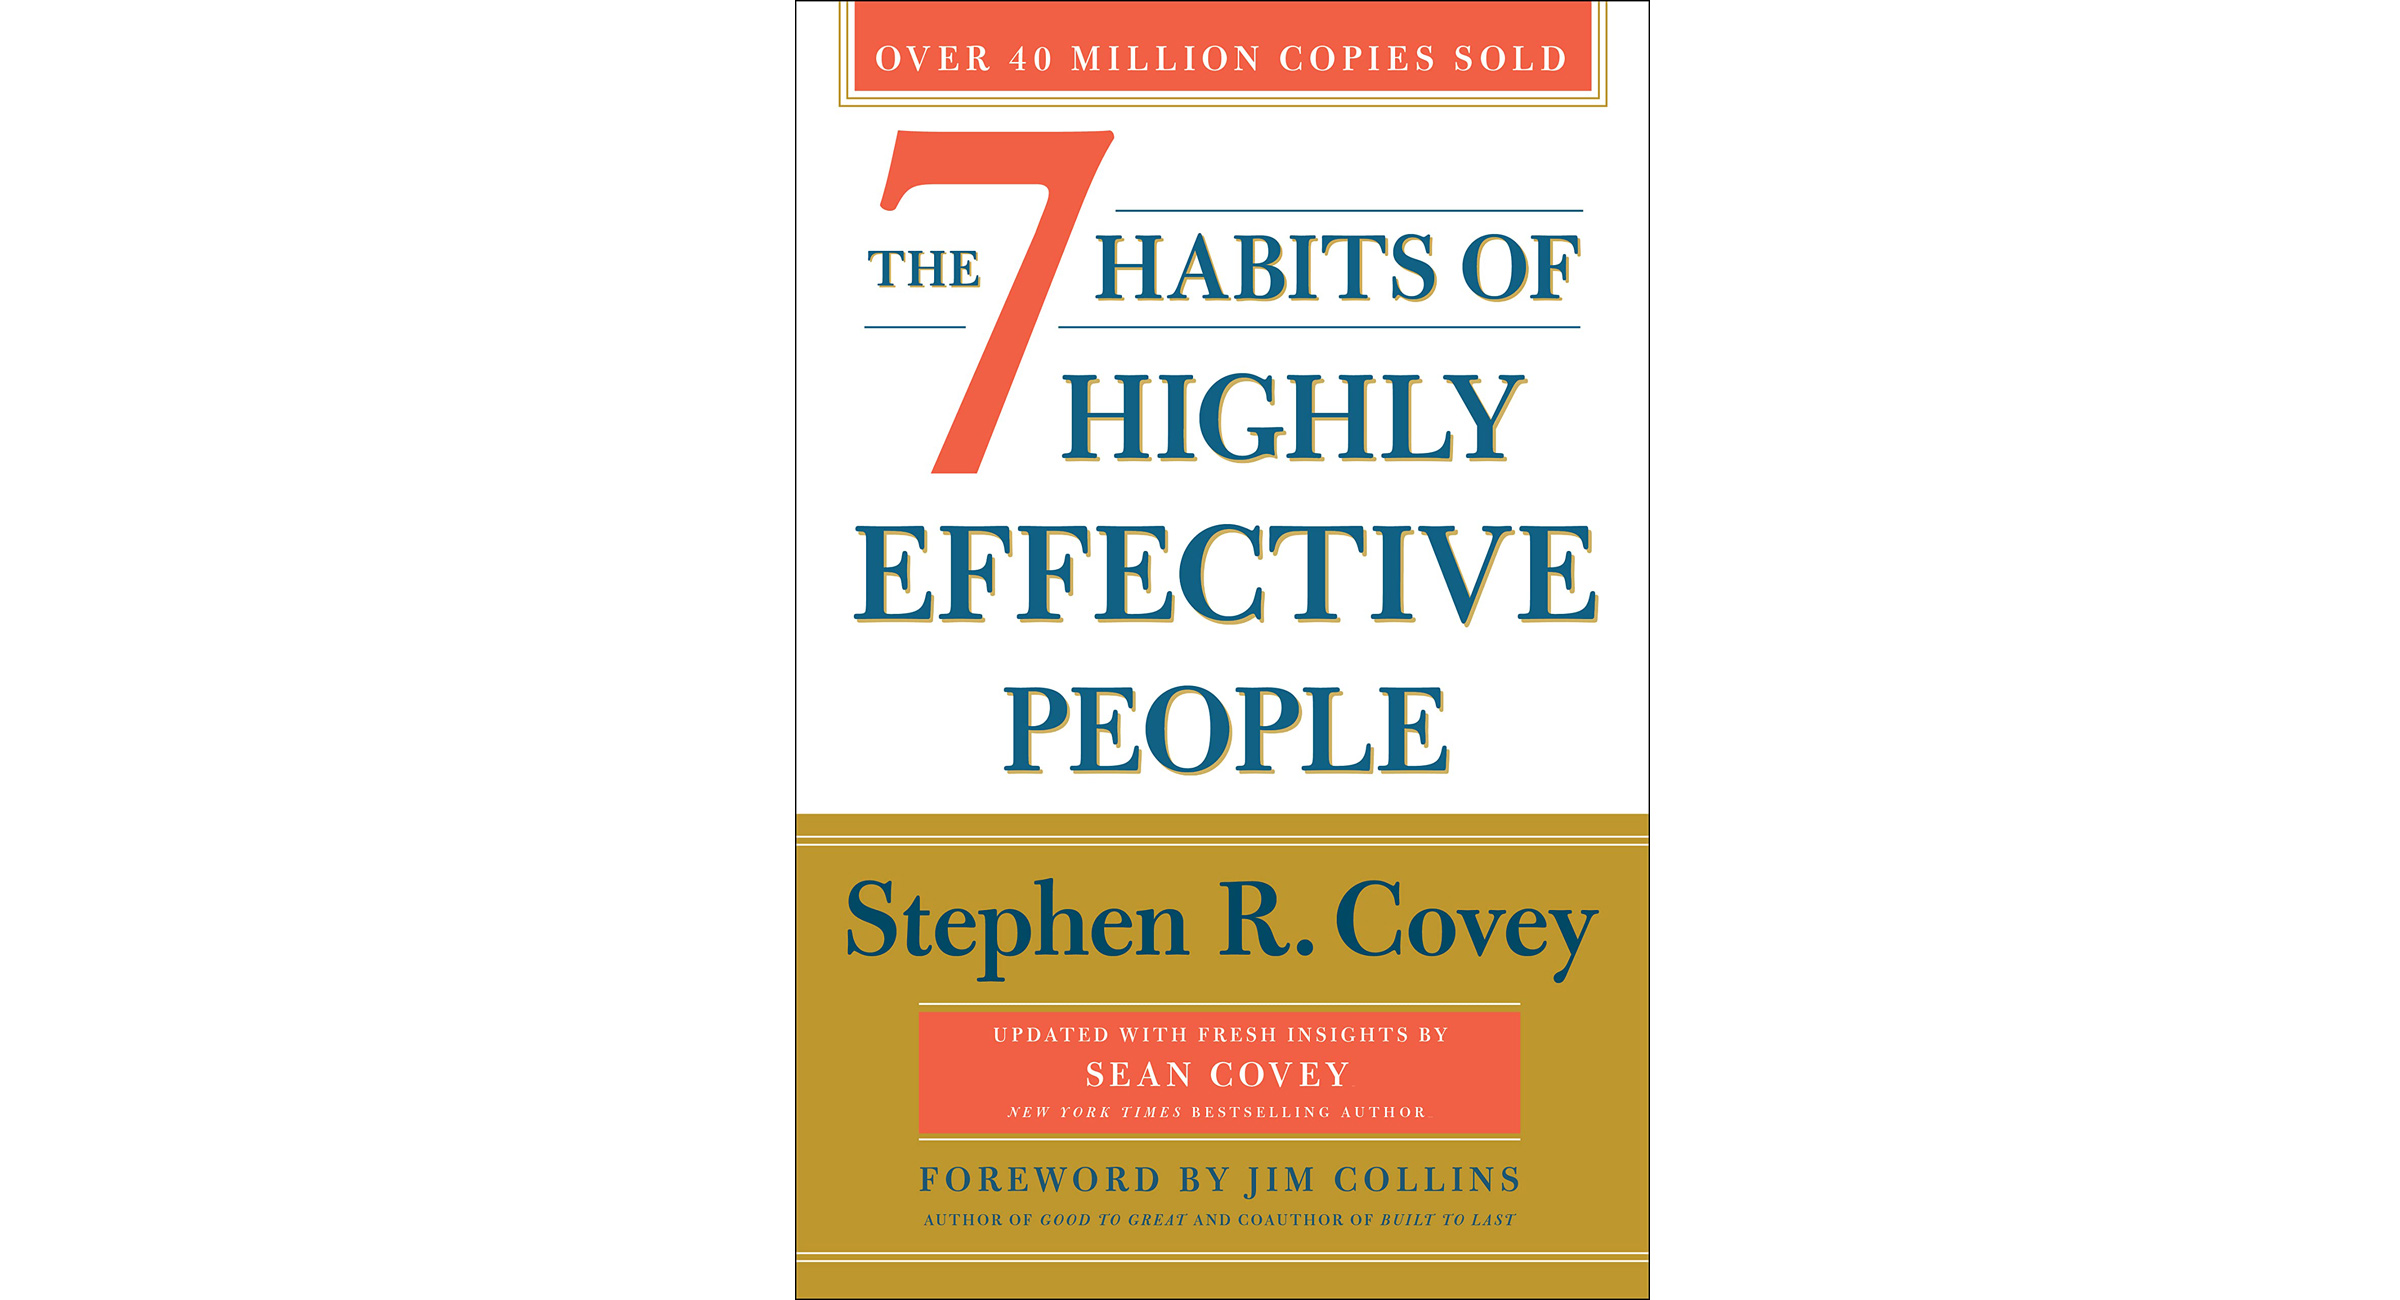 The 7 Habits of Highly Effective People - Implemented by OceanEvent